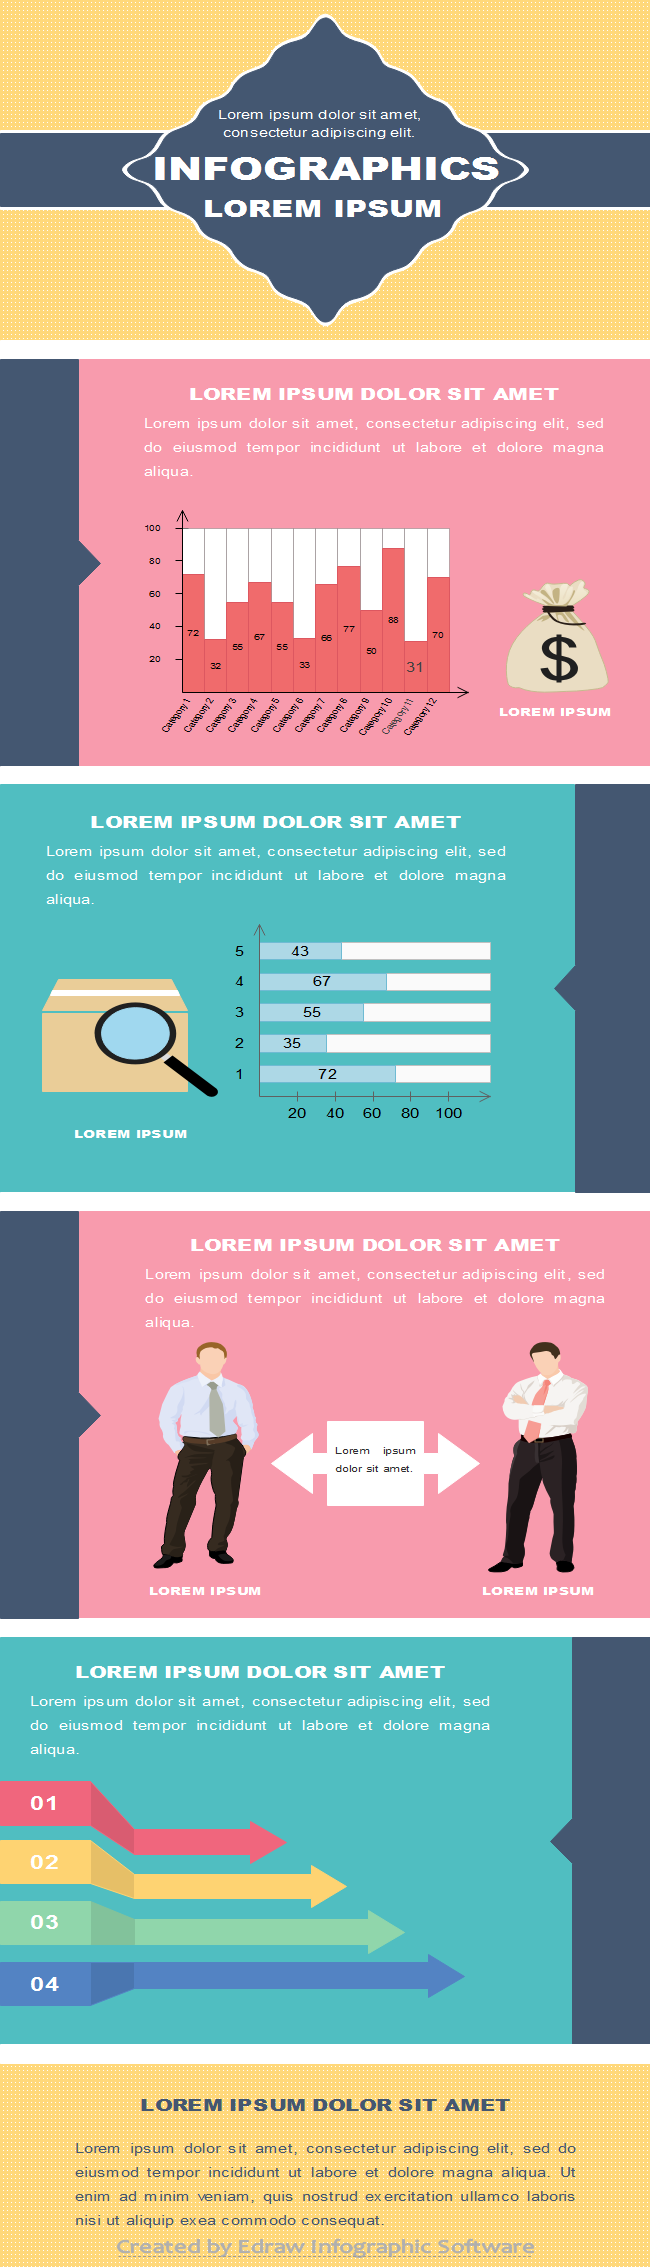 Free Download Editable Business Infographic Templates